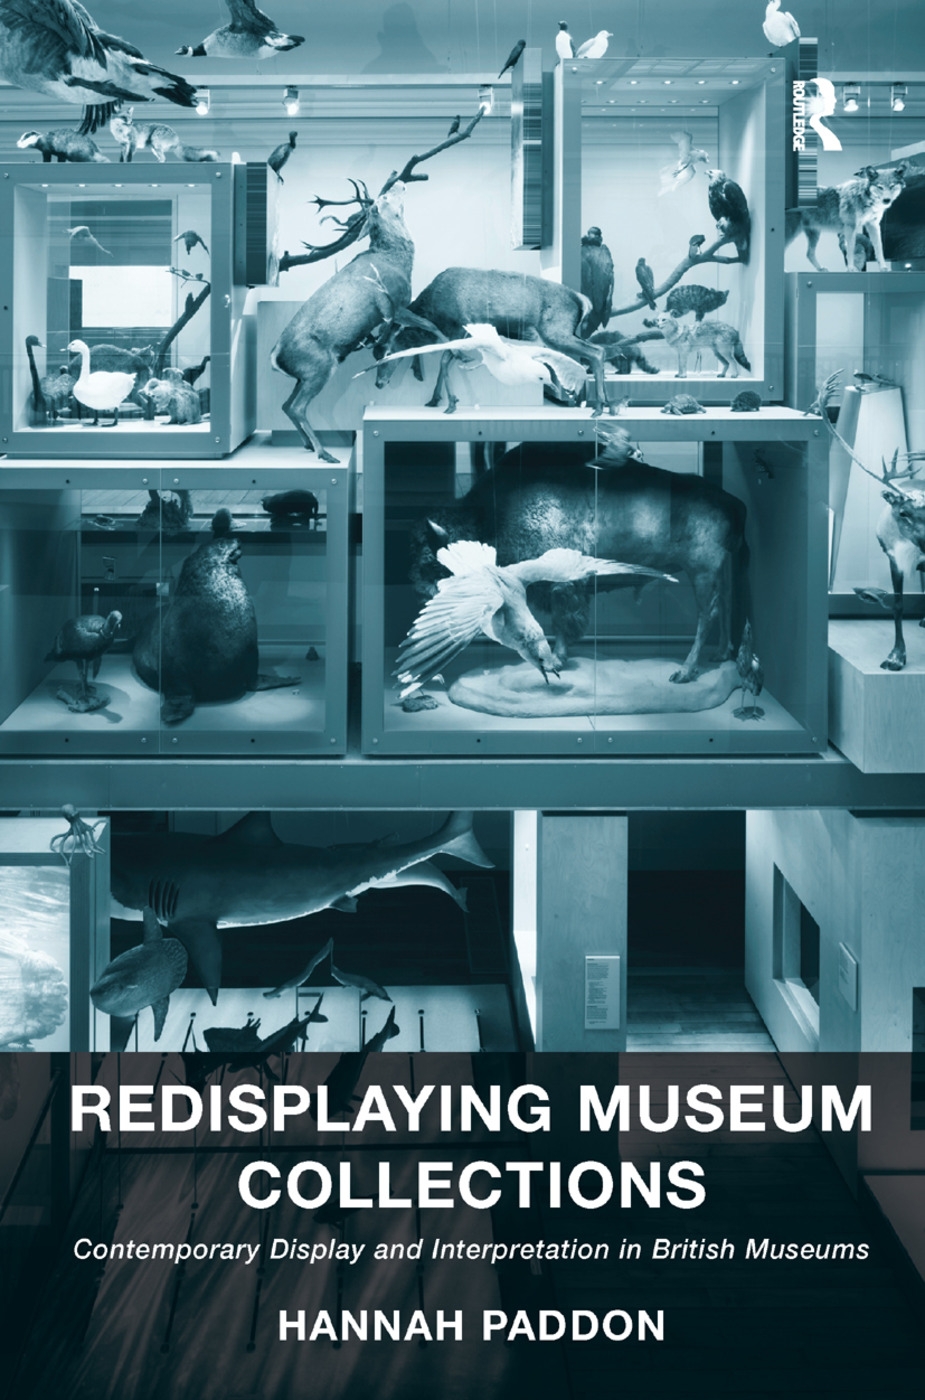 Redisplaying Museum Collections: Contemporary Display and Interpretation in British Museums